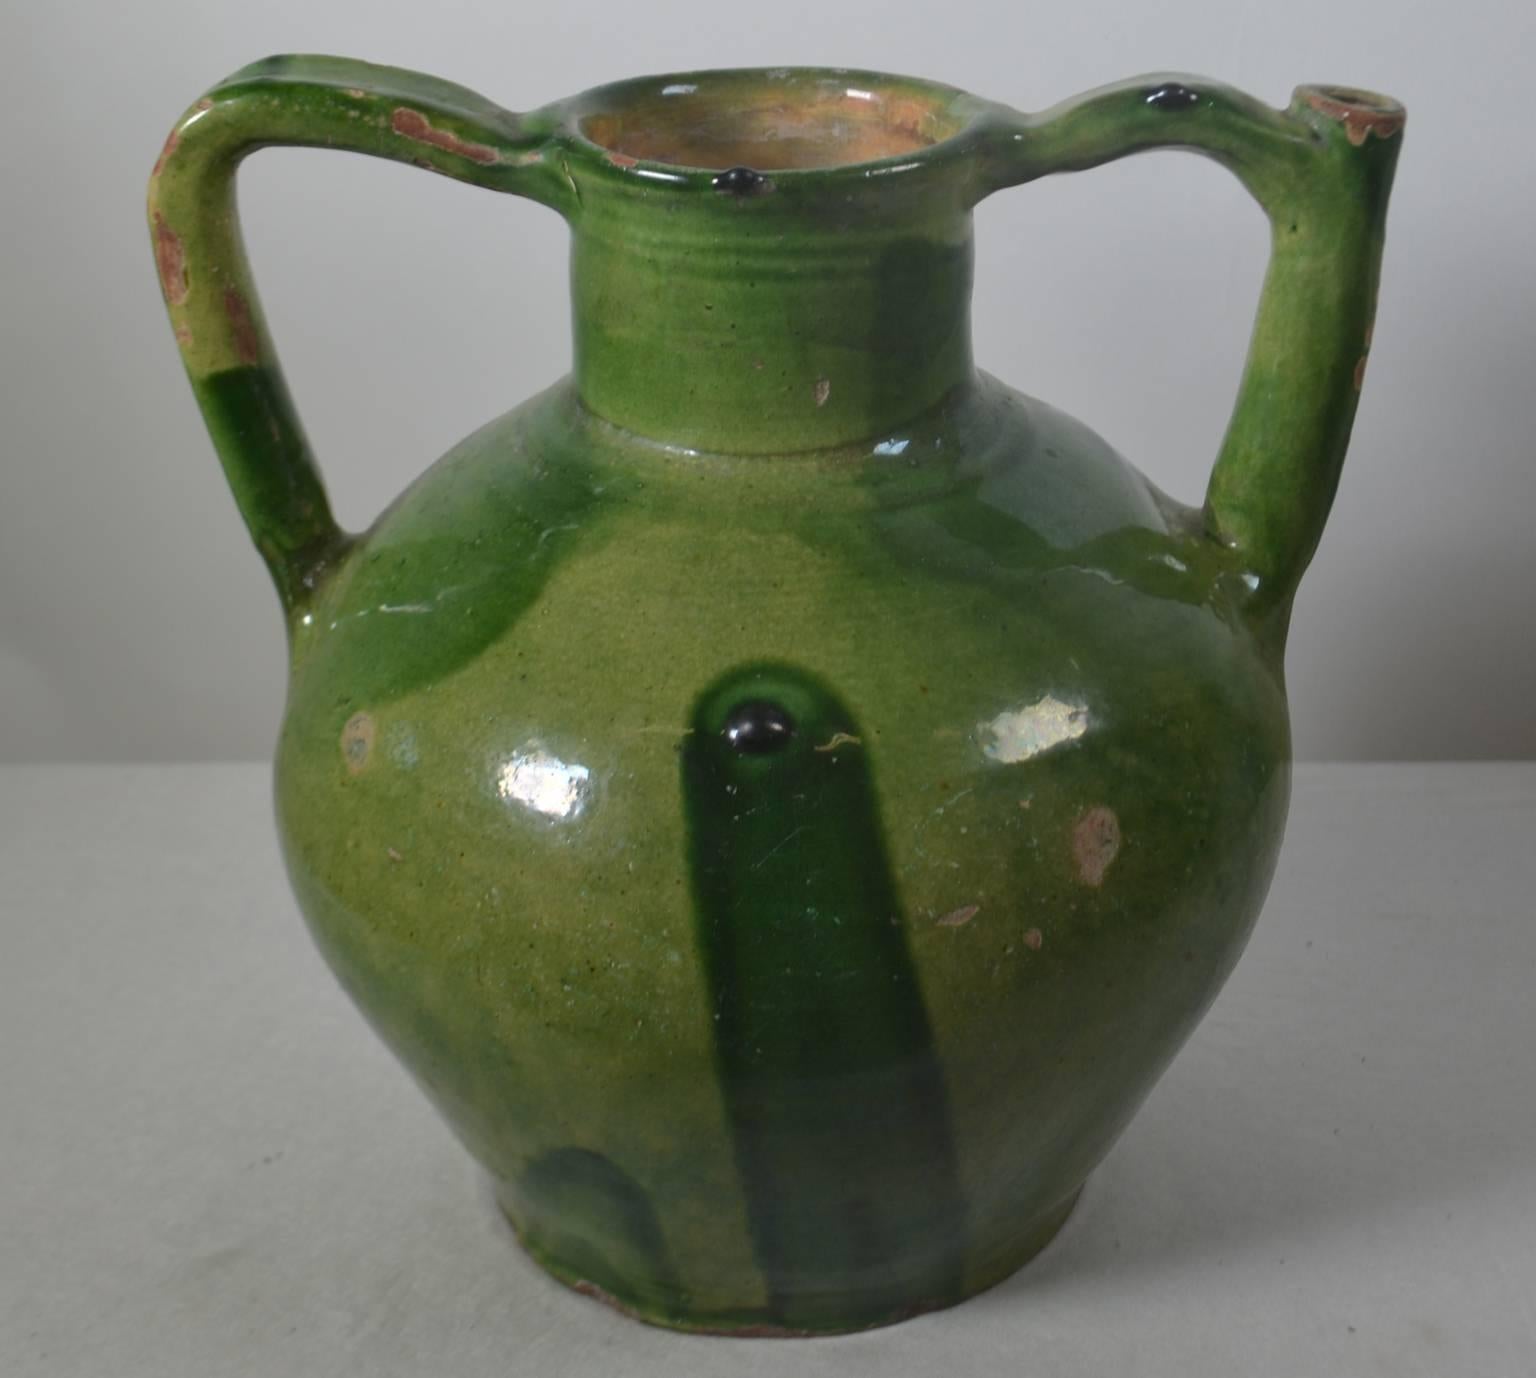 Terracotta jug with spout in handle. Green light and dark glaze, circa 1860. Once a common piece of pottery used daily in French kitchens, these earthenware jugs have become showcase pieces sought by designers and collectors. These beautiful vessels